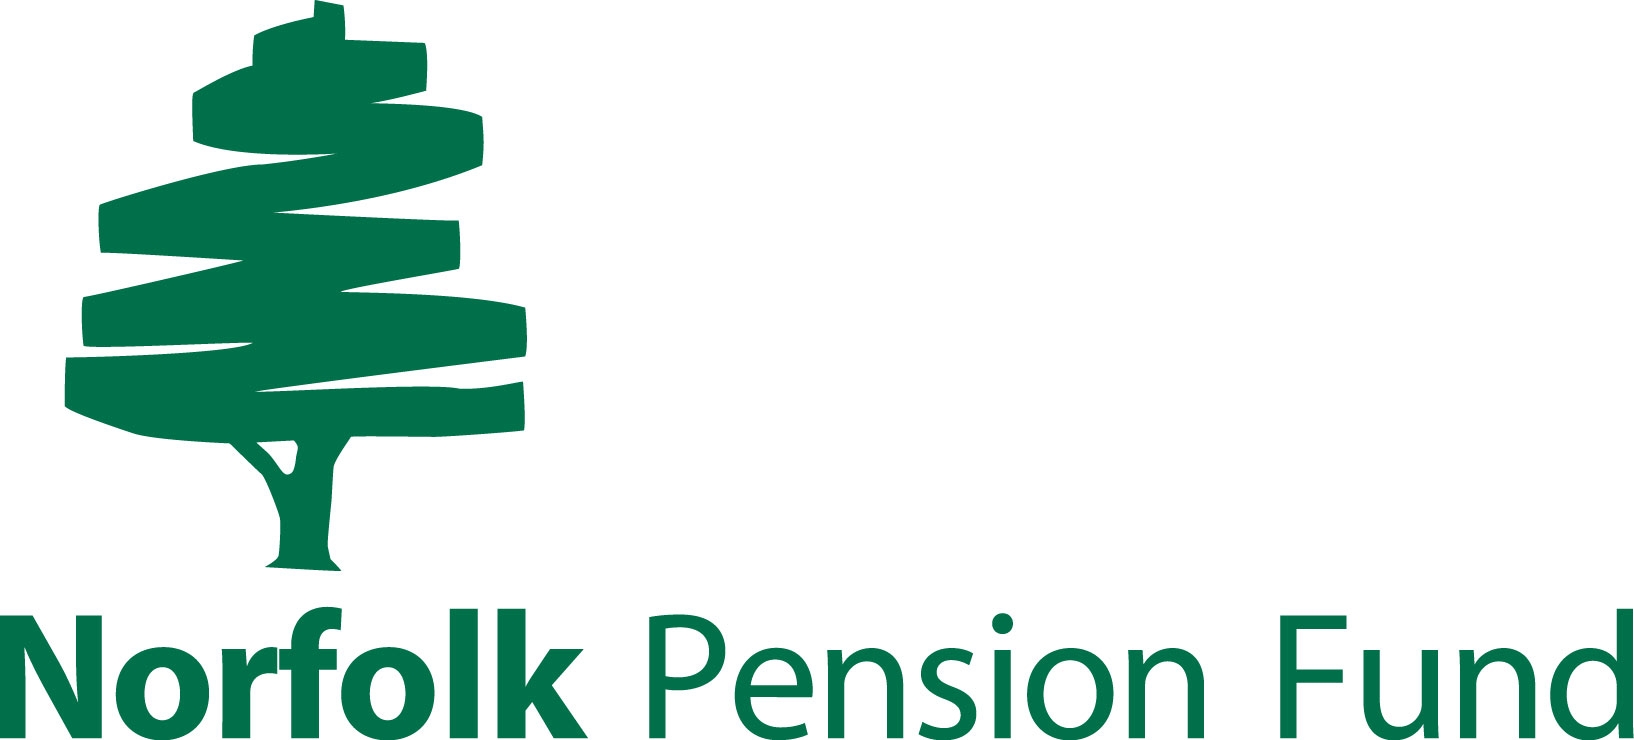 L OCAL GOVERNMENT PENSION SCHEME  EMPLOYER’S PENSION POLICY